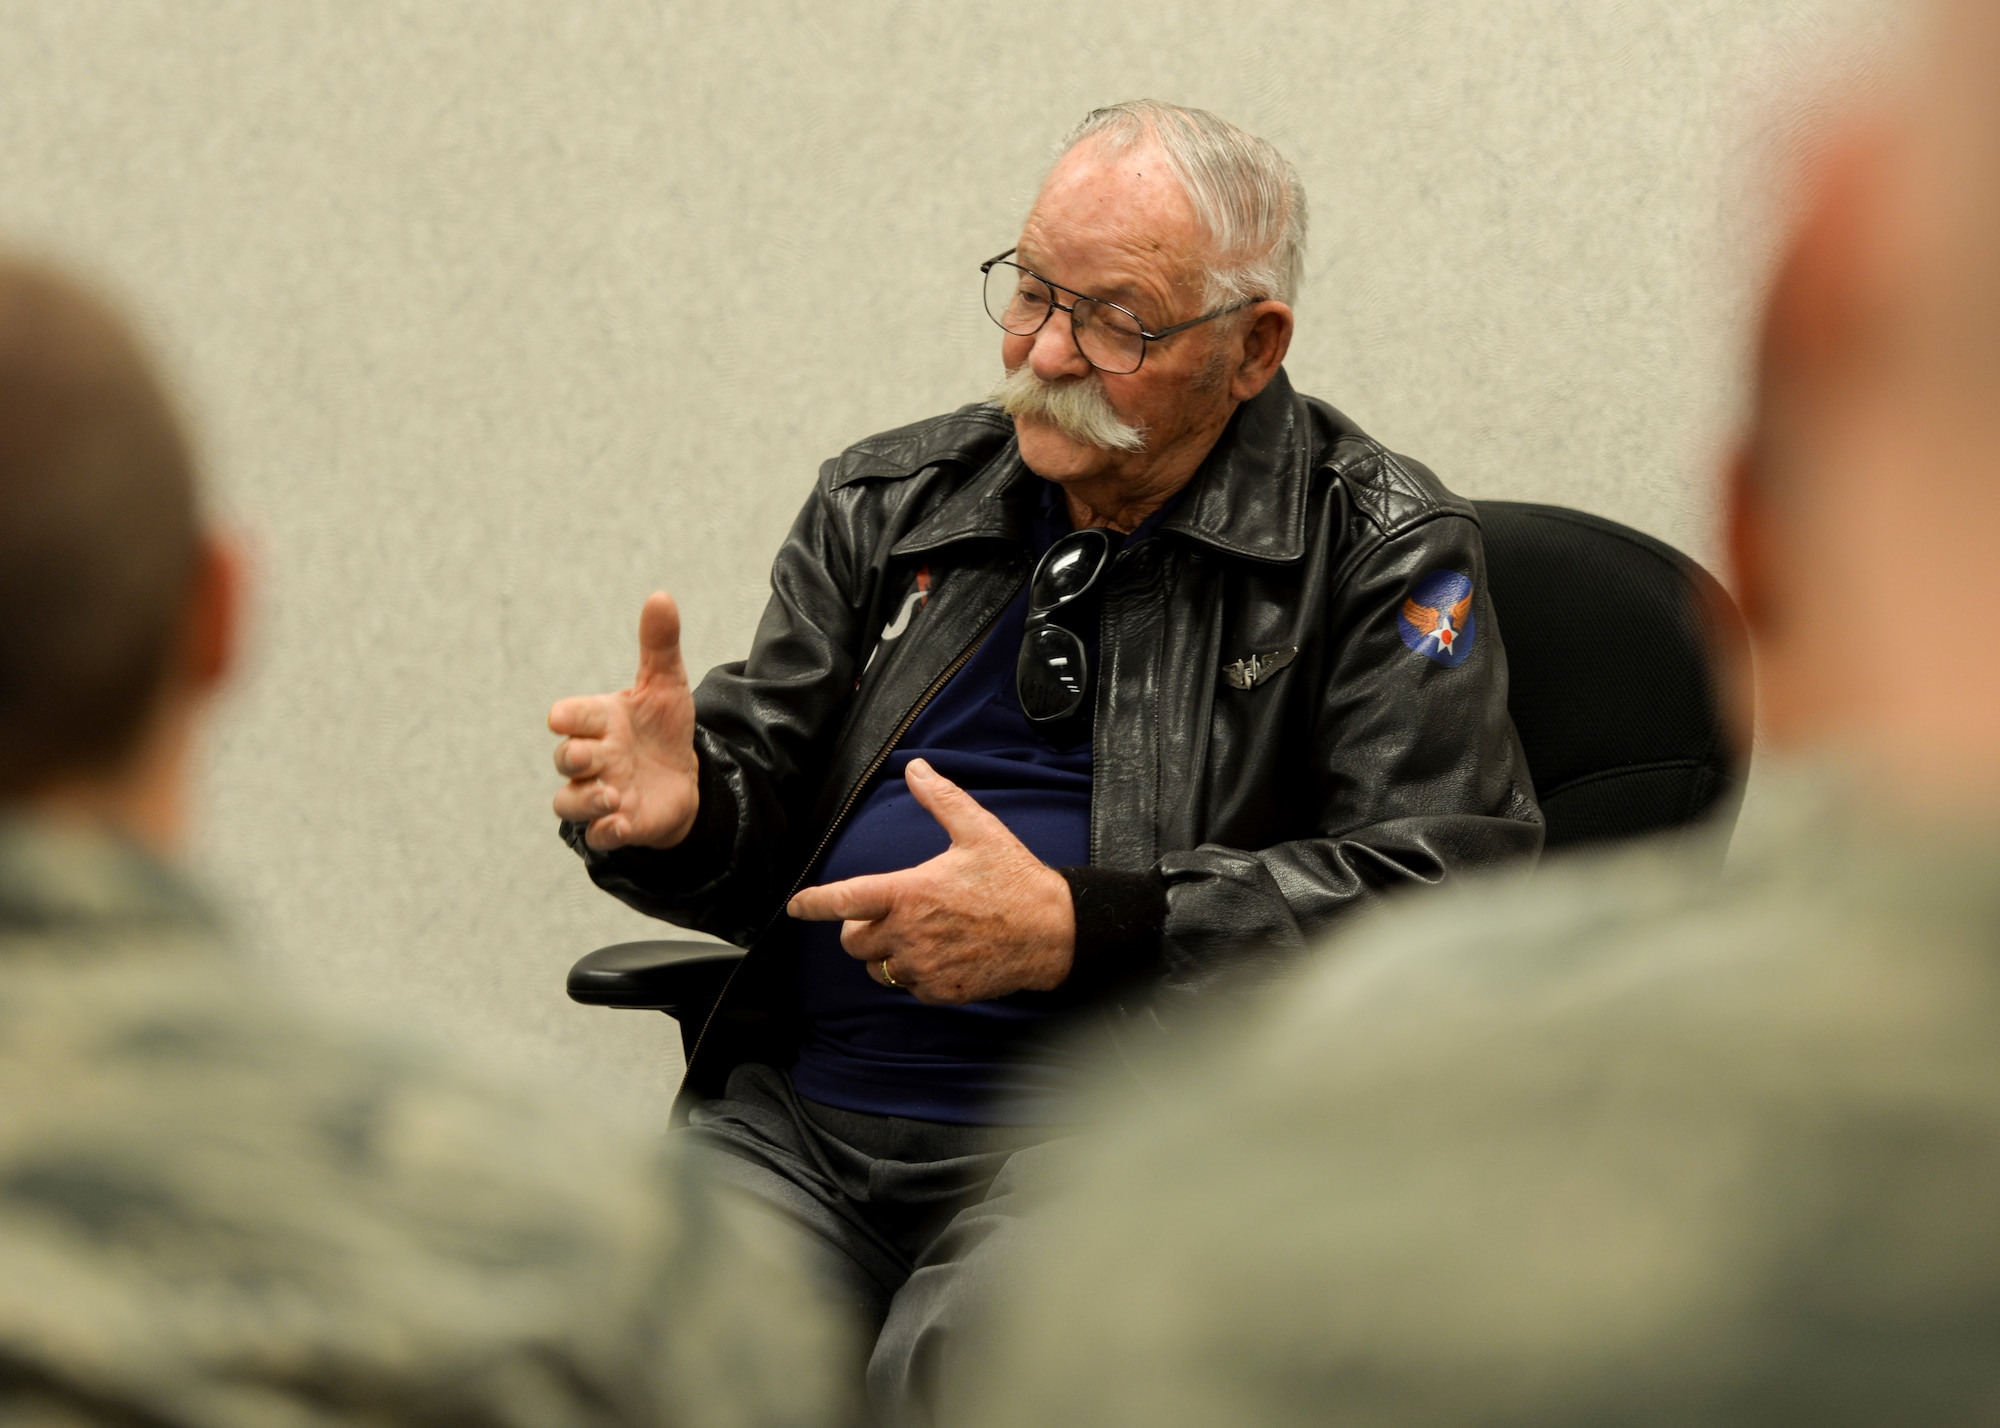 Robert Schilling, a former Airman and gunner on the AC-47 “Spooky,” tells stories of his military experience to a class inside the Airman Leadership School at Ellsworth Air Force Base, S.D., March 20, 2017. During his presentation, Schilling shared stories of his time in Vietnam and how good leadership can make a difference in a life-or-death situation. (U.S. Air Force photo by Airman 1st Class Randahl J. Jenson)